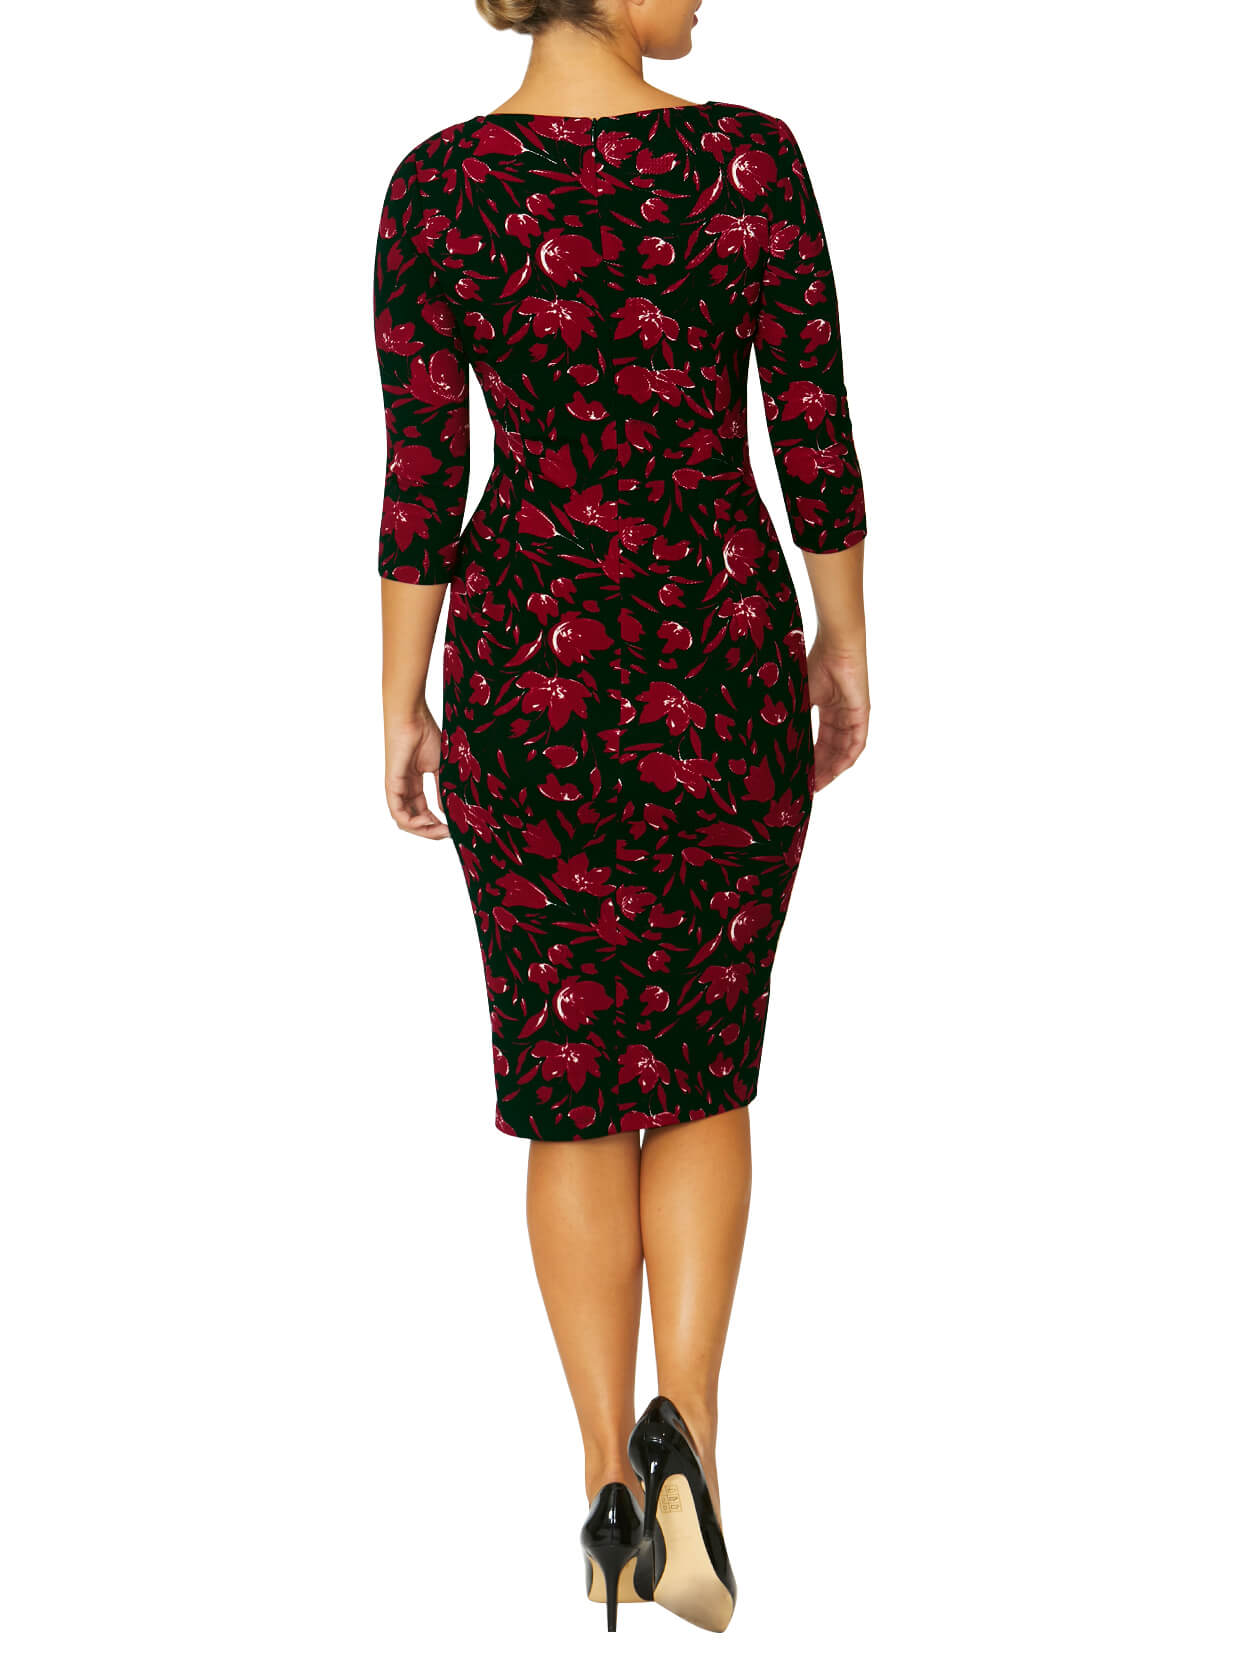 Verona Black and Red Jersey Dress